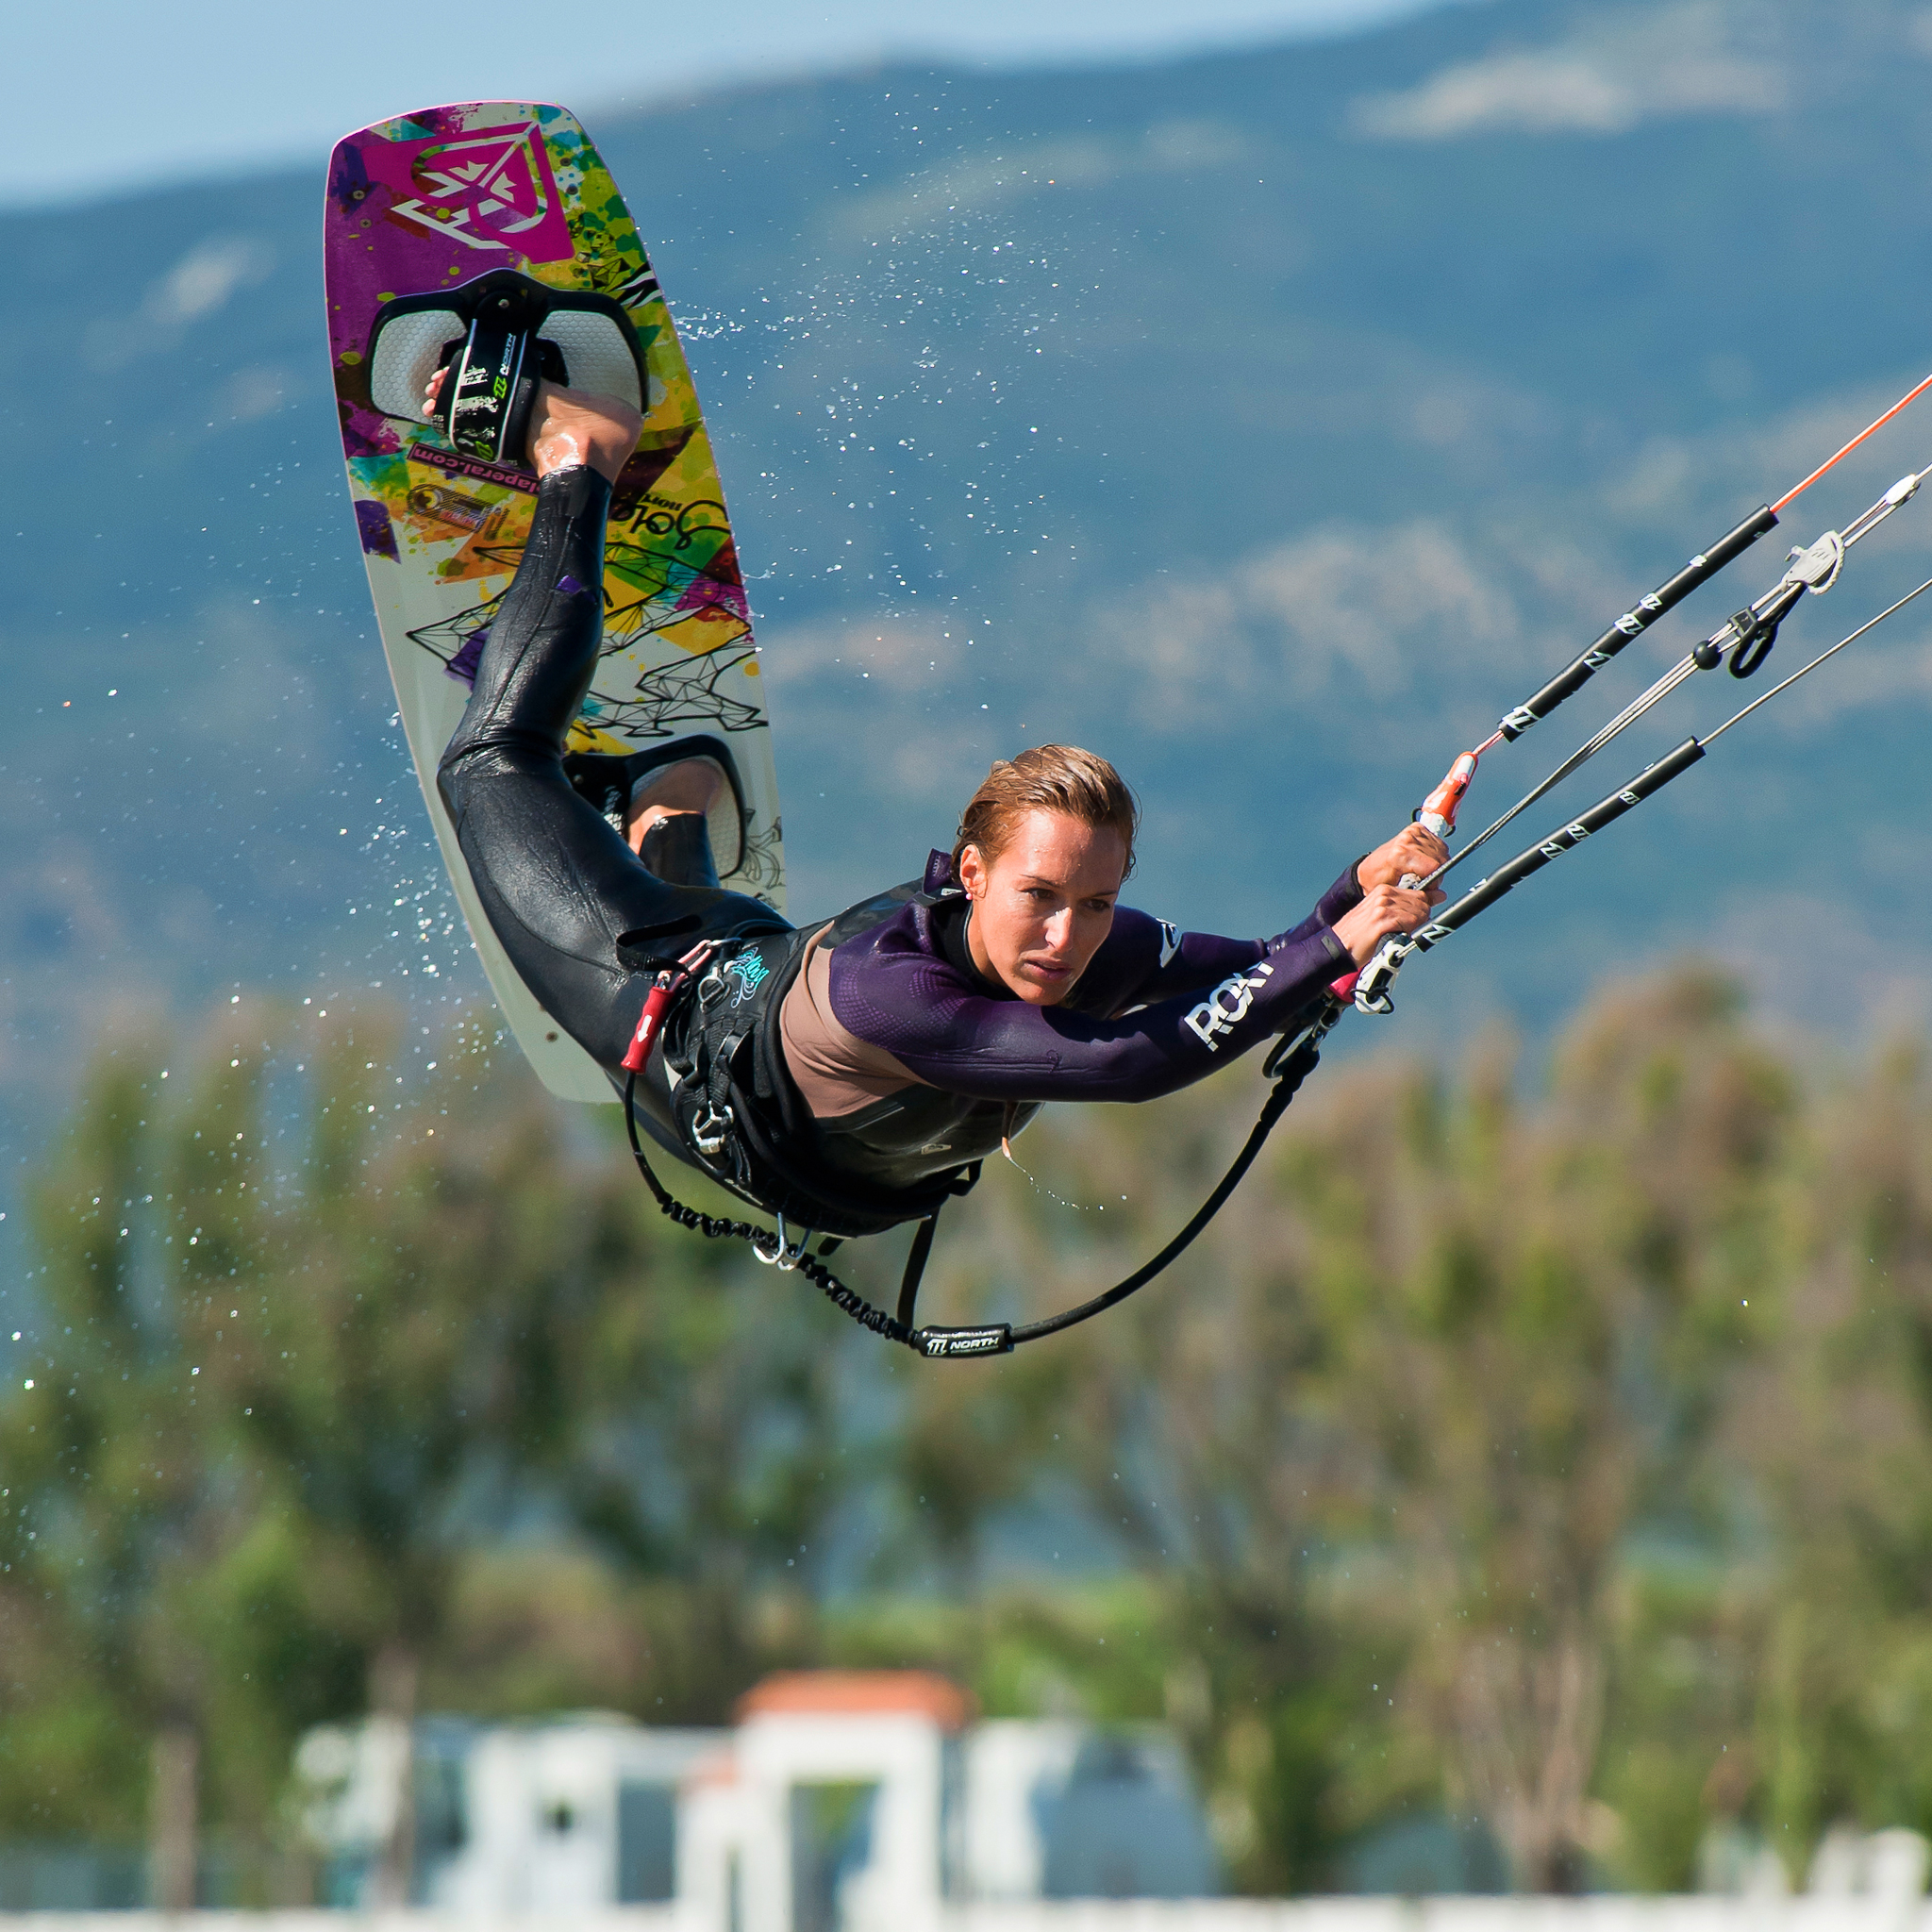 kitesurf wallpaper image - Angela Peral raily into town - in resolution: iPad 2 & 3 2048 X 2048